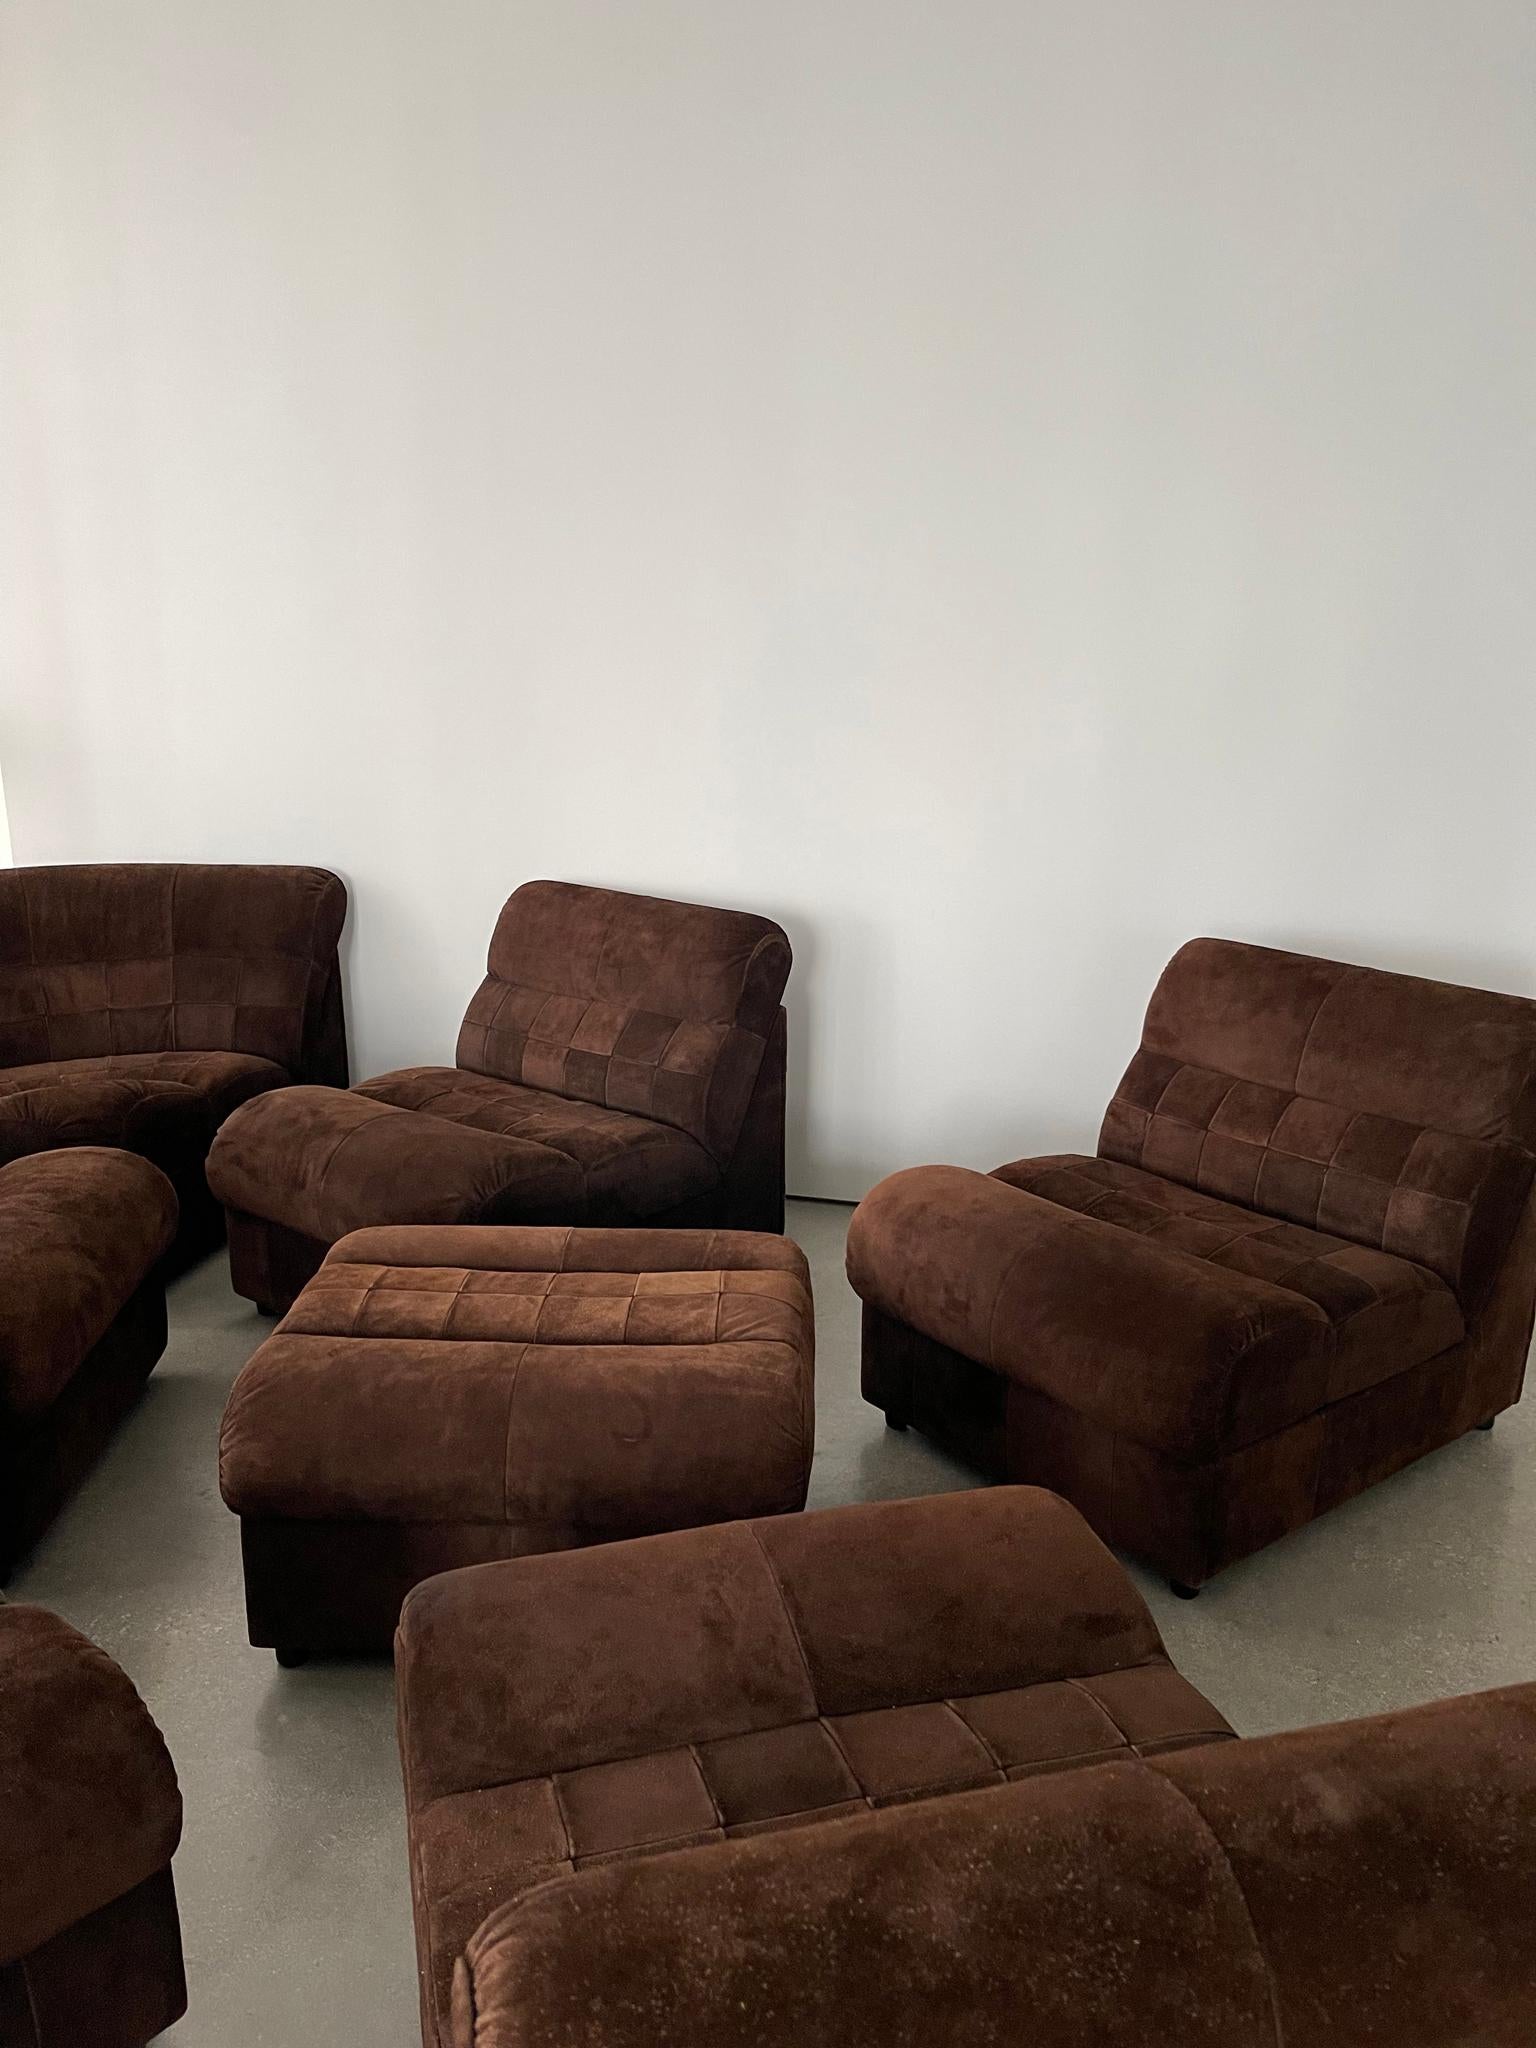 Brazilian 1960's Chocolate Suede Patchwork Percival Lafer Sectional Sofa